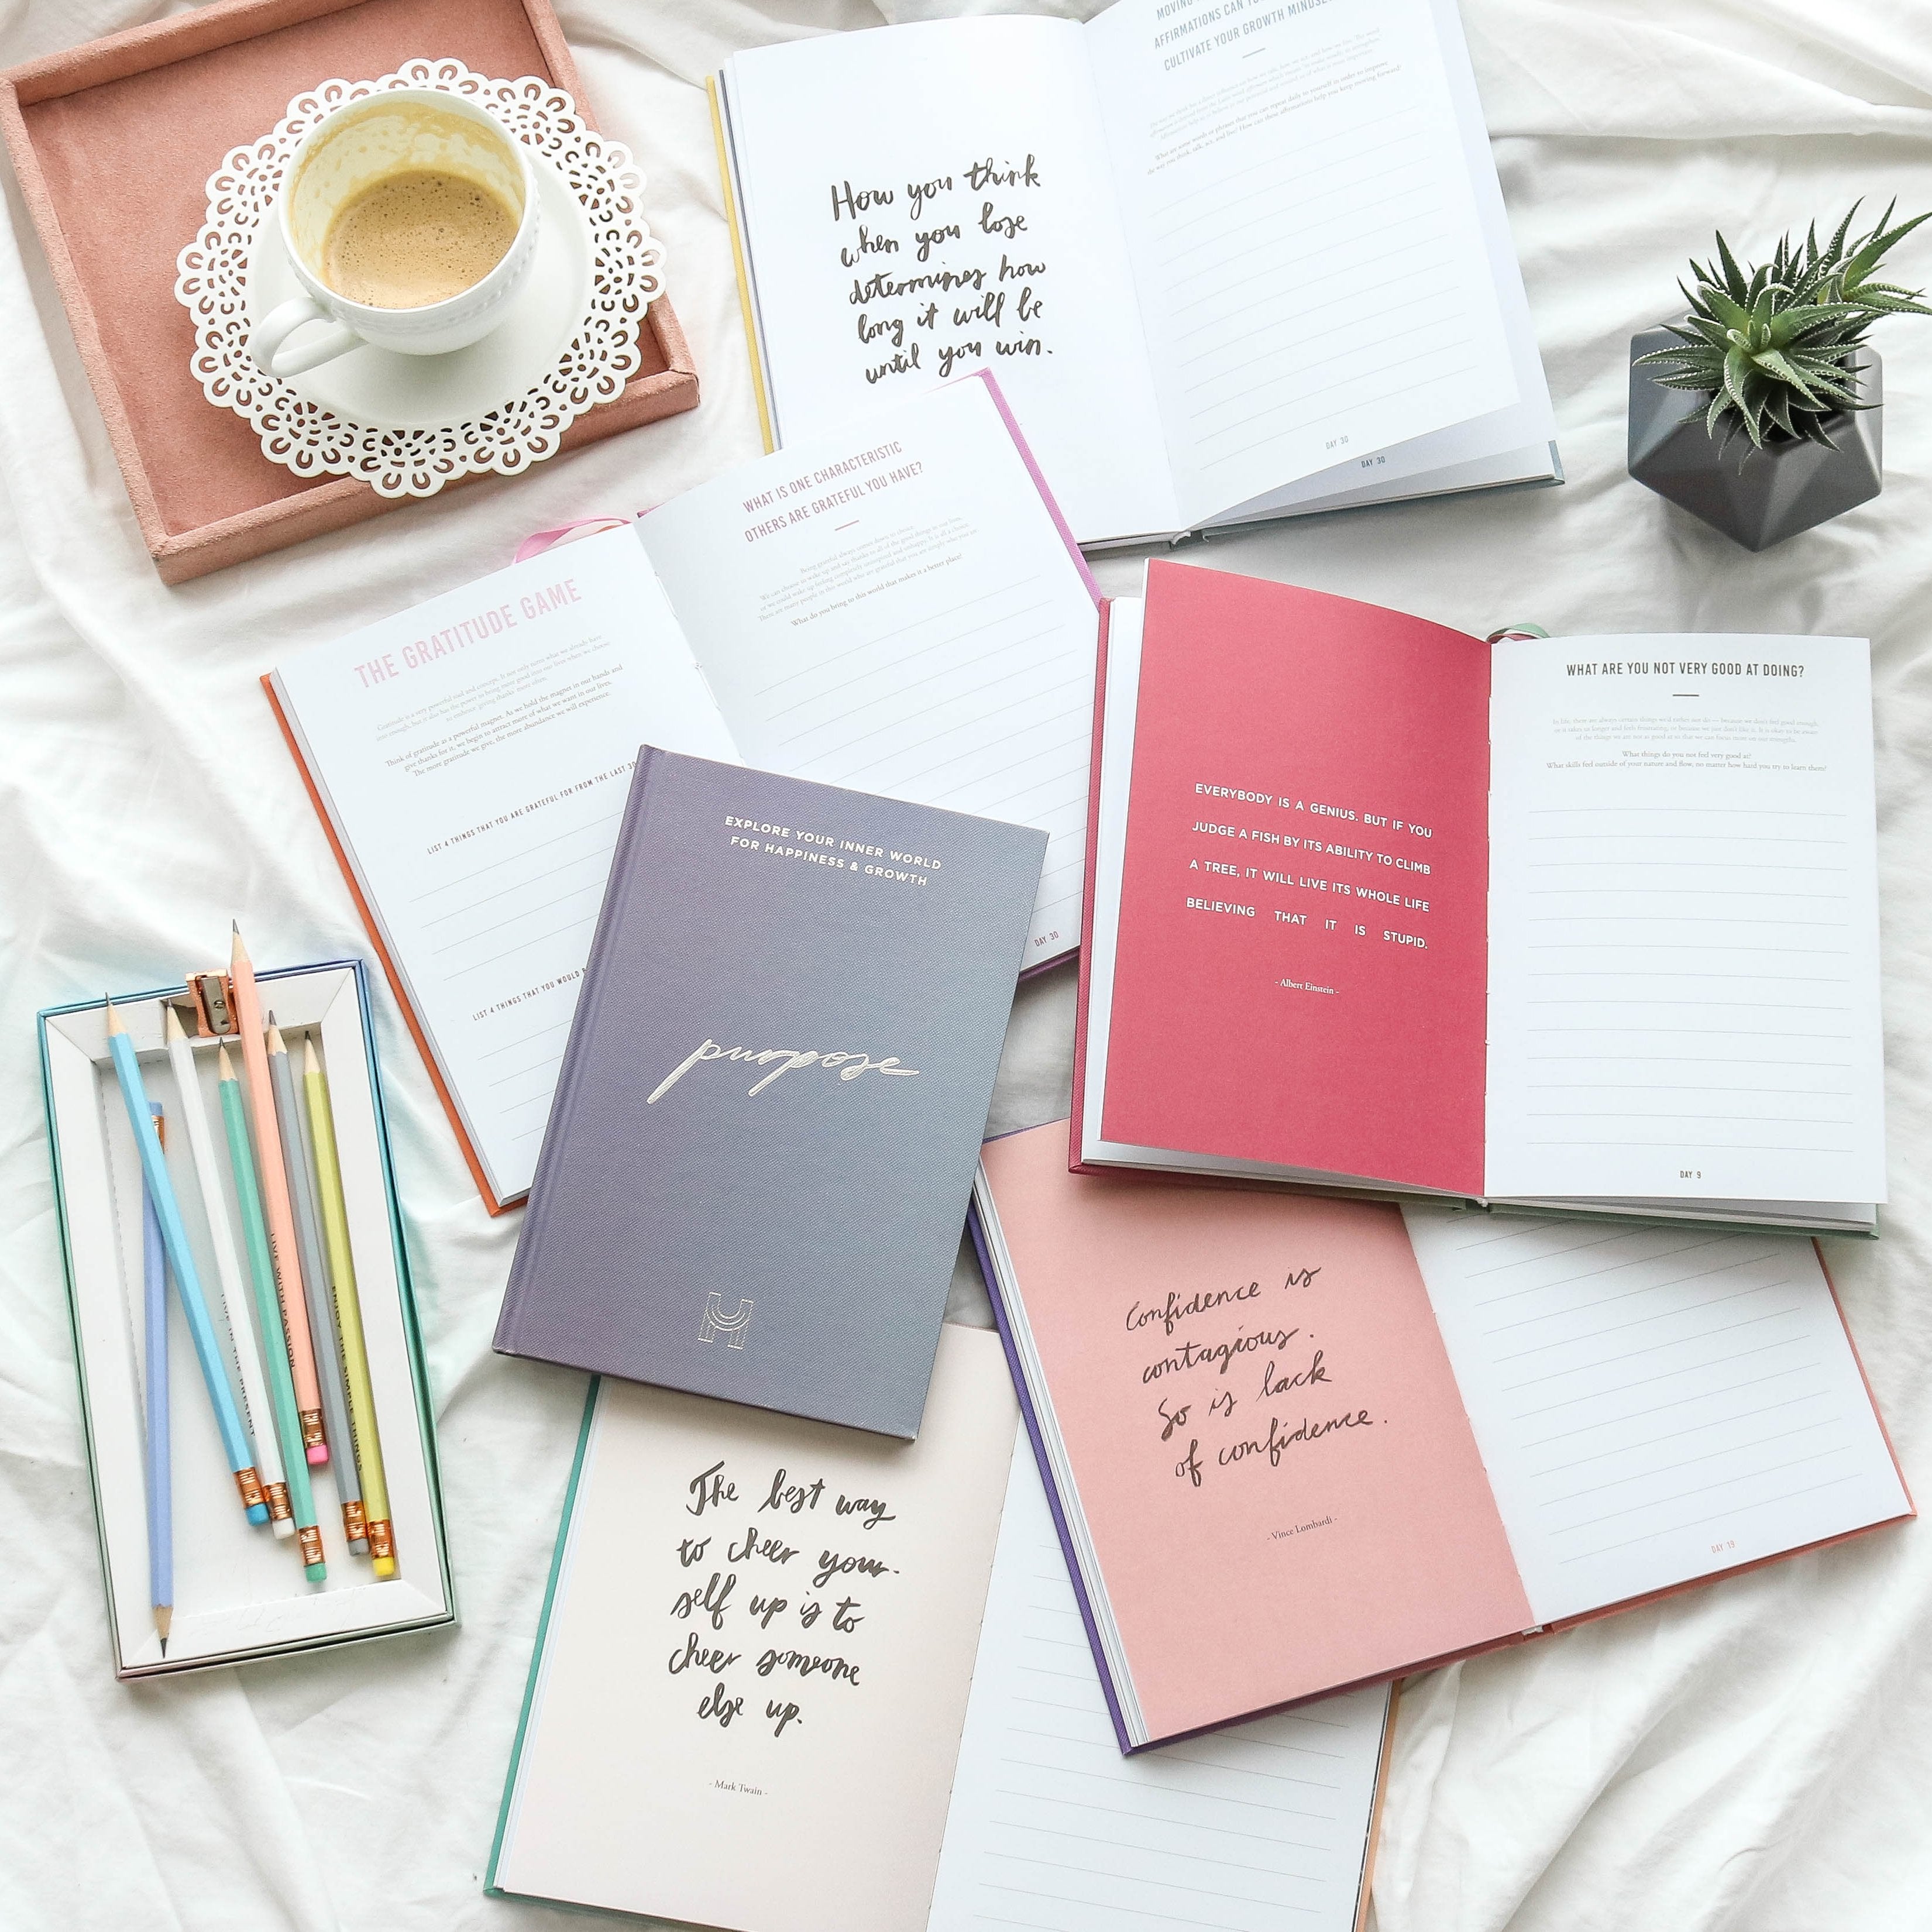 Explore Your Inner World | Purpose Journal - The Happiness Planner®